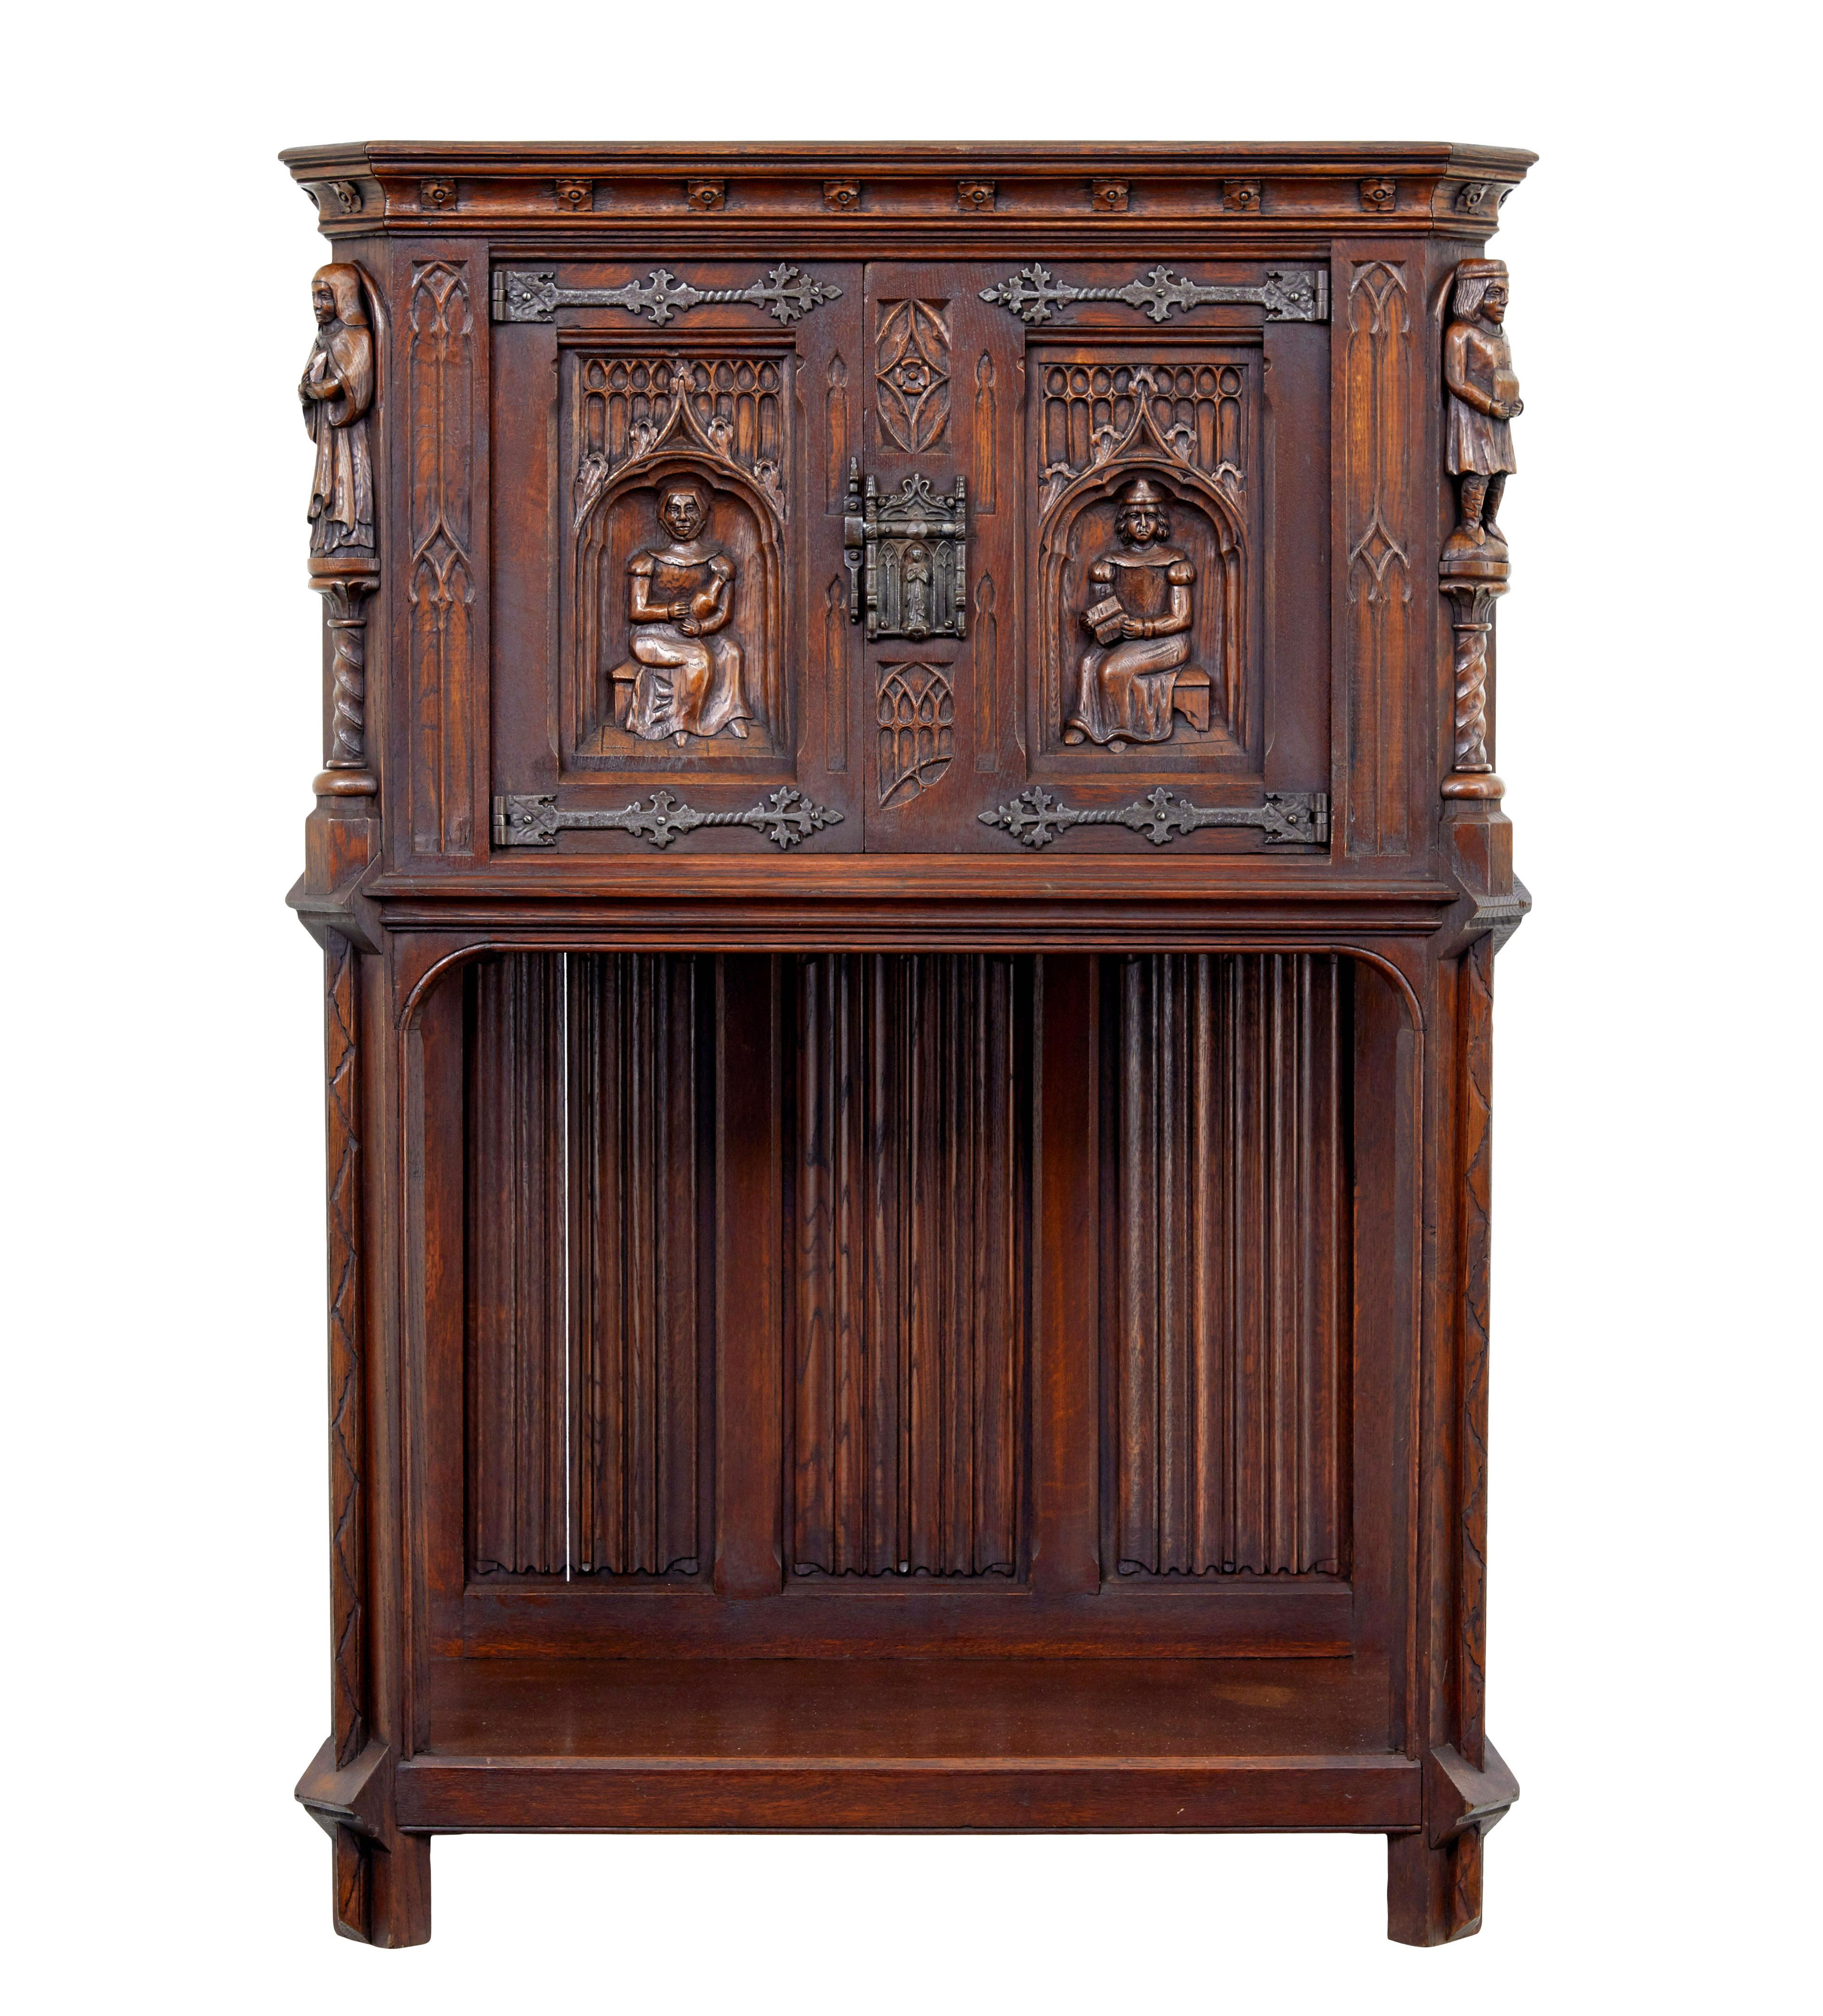 Early 20th century carved oak gothic revival cupboard circa 1900.

Good quality flemish neo renaissance cupboard.  Made in 1 piece, with the top forming a cupboard.  Decorated with hand carved figures in period clothing, flanked either side by